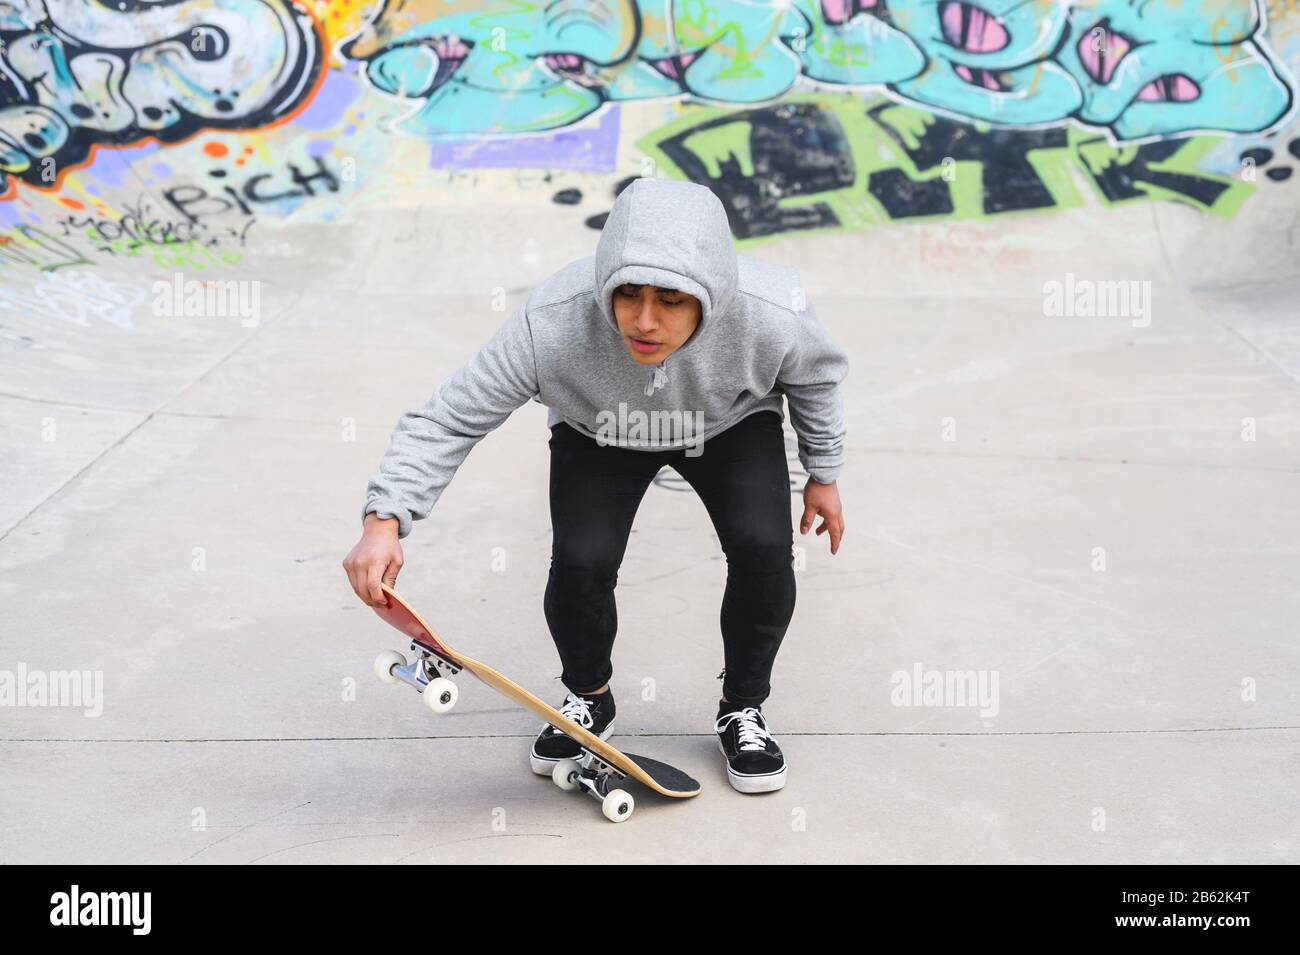 young skater doing jump trick at skate park . Stock Photo